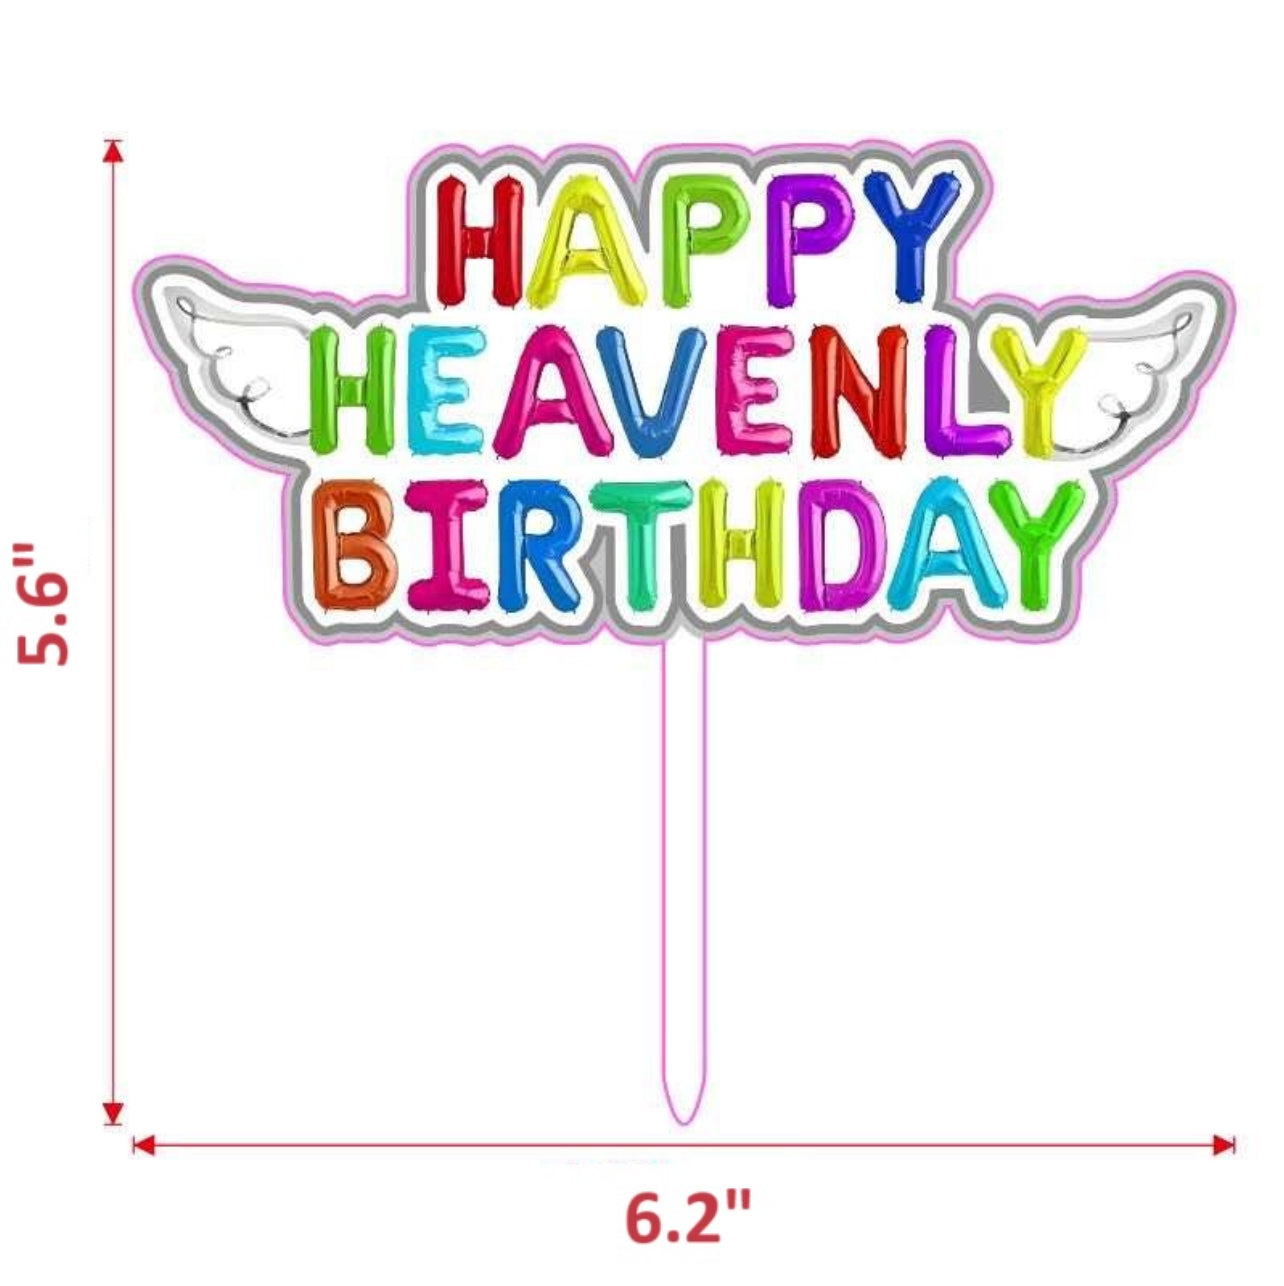 Original Cake Topper Happy Heavenly Birthday Colorful with angel wings dimensions